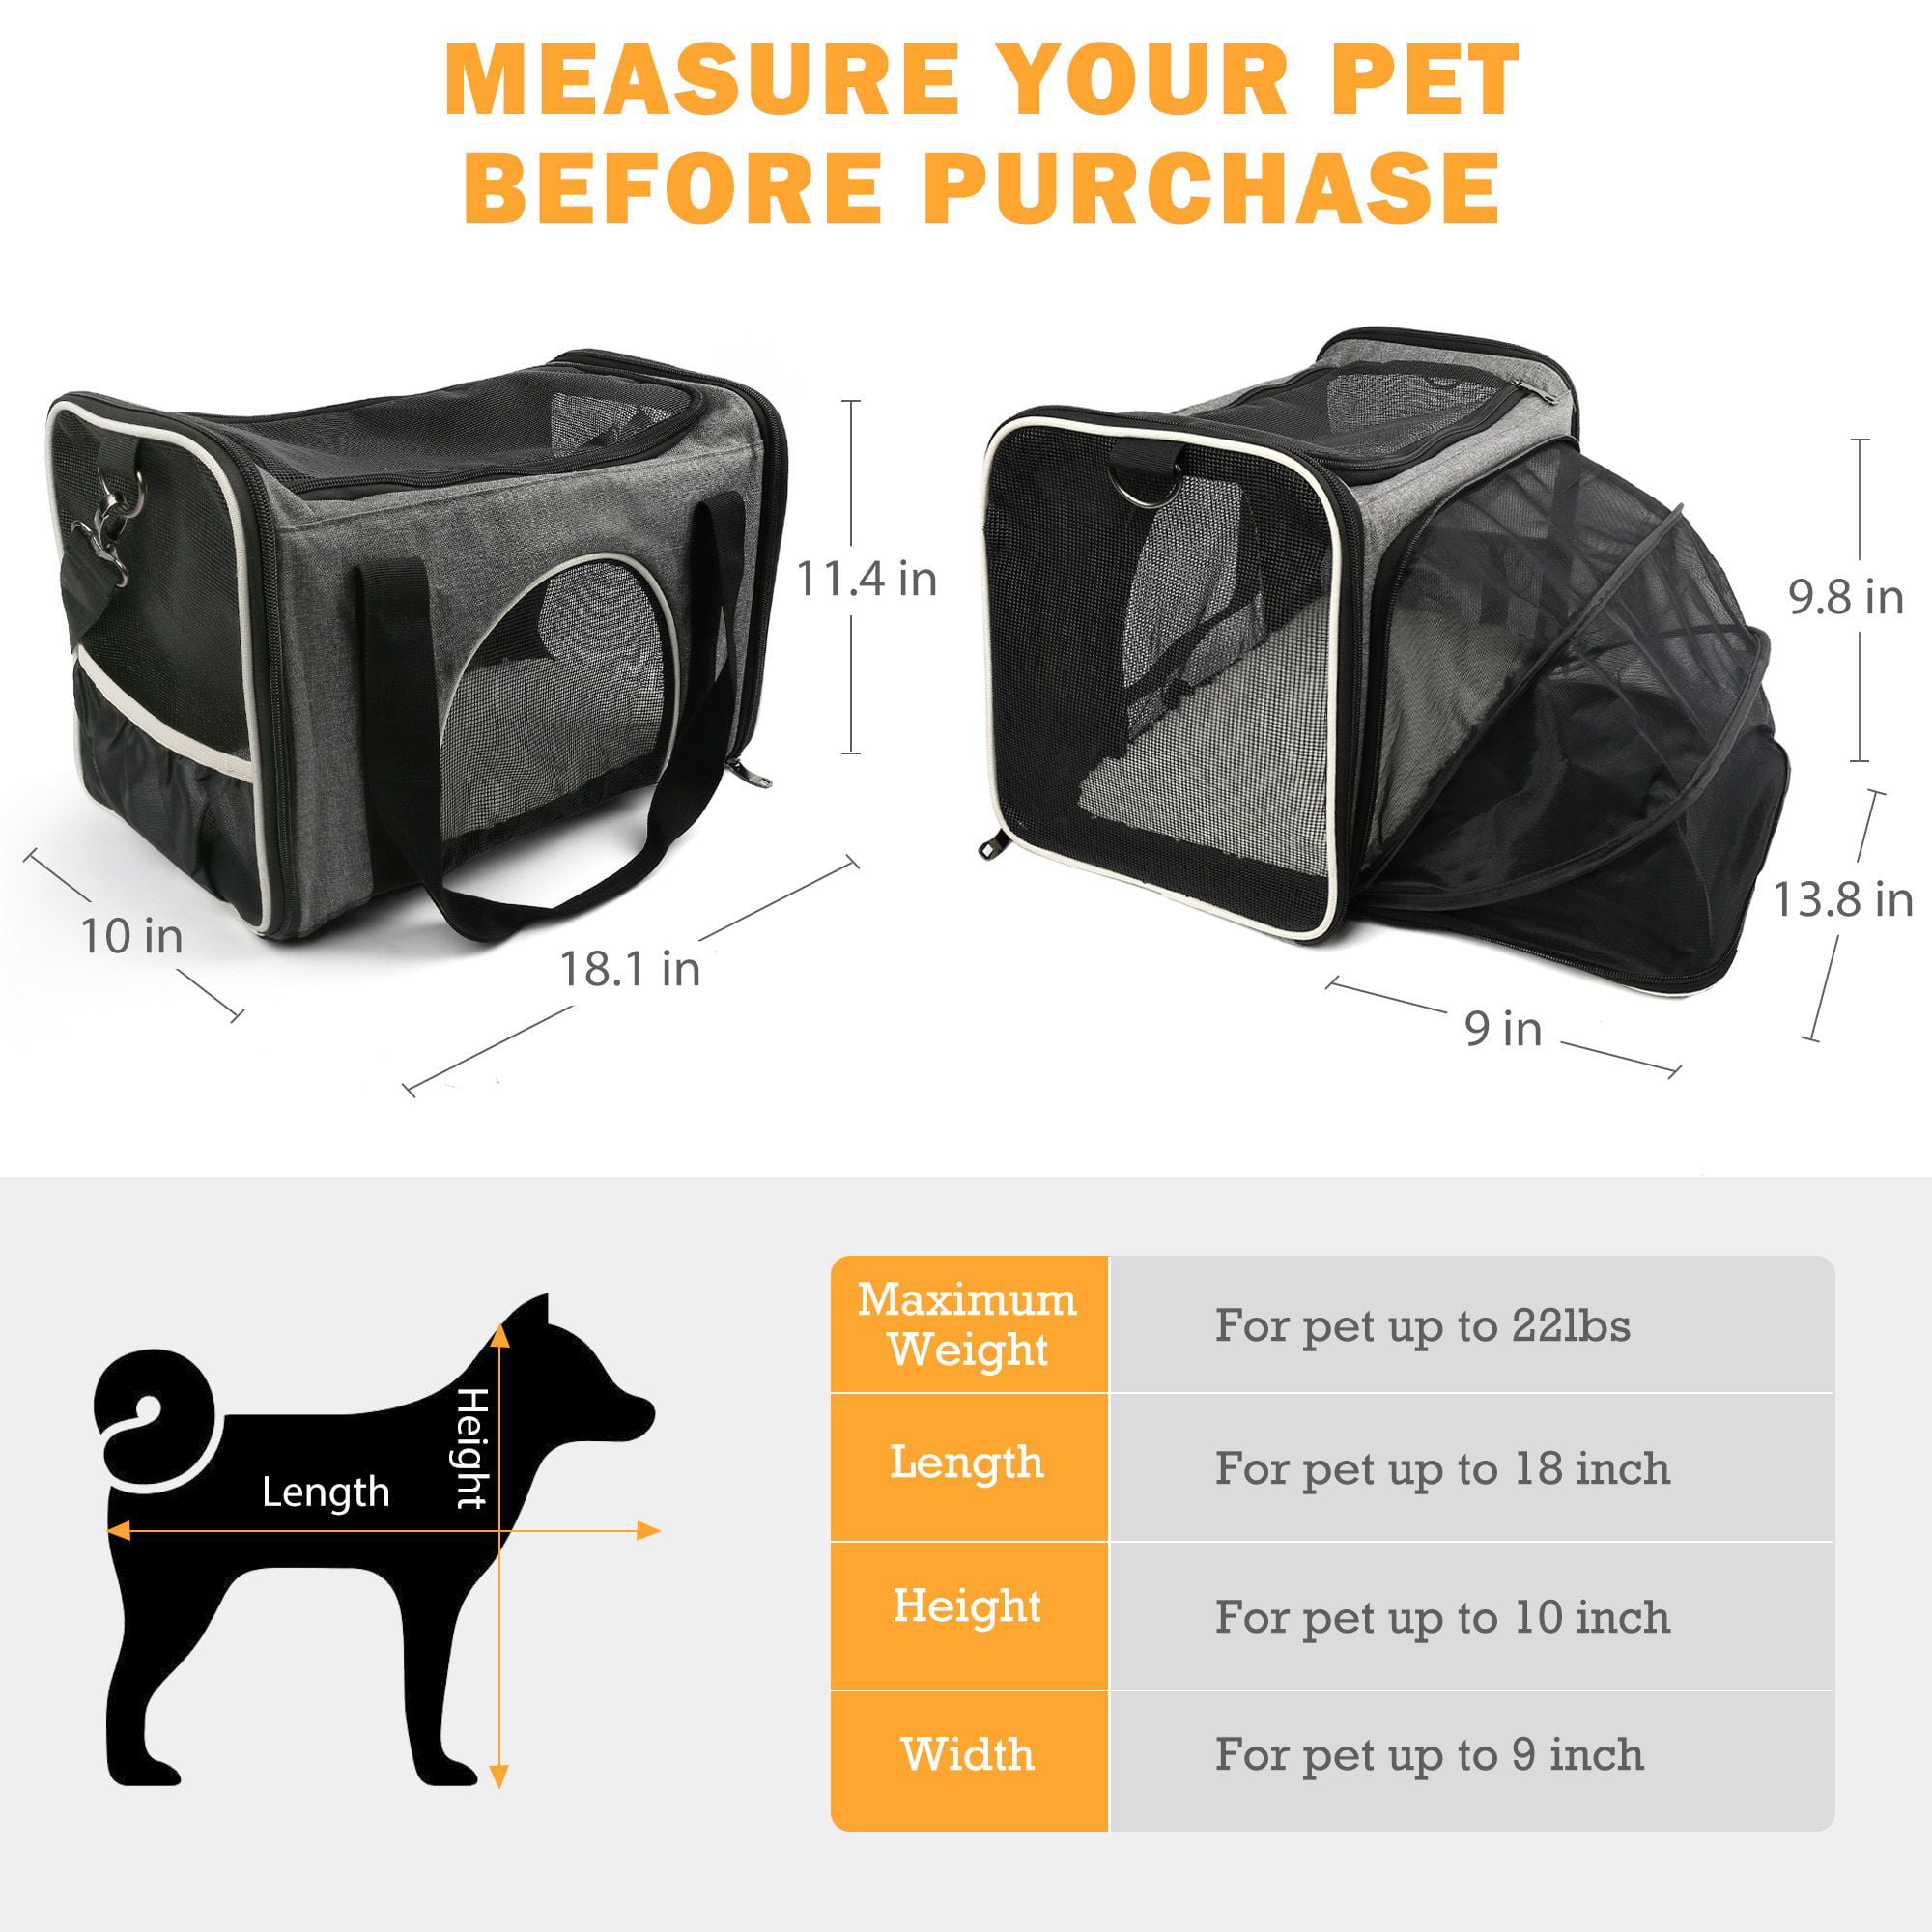 EdenPetz Airline-Approved Pet Carrier Bag for Small Dogs Hiking Walking & Outdoor Use,Free Collapsible Pet Bowl Included Kittens,Designed for Travel Puppies Cats 